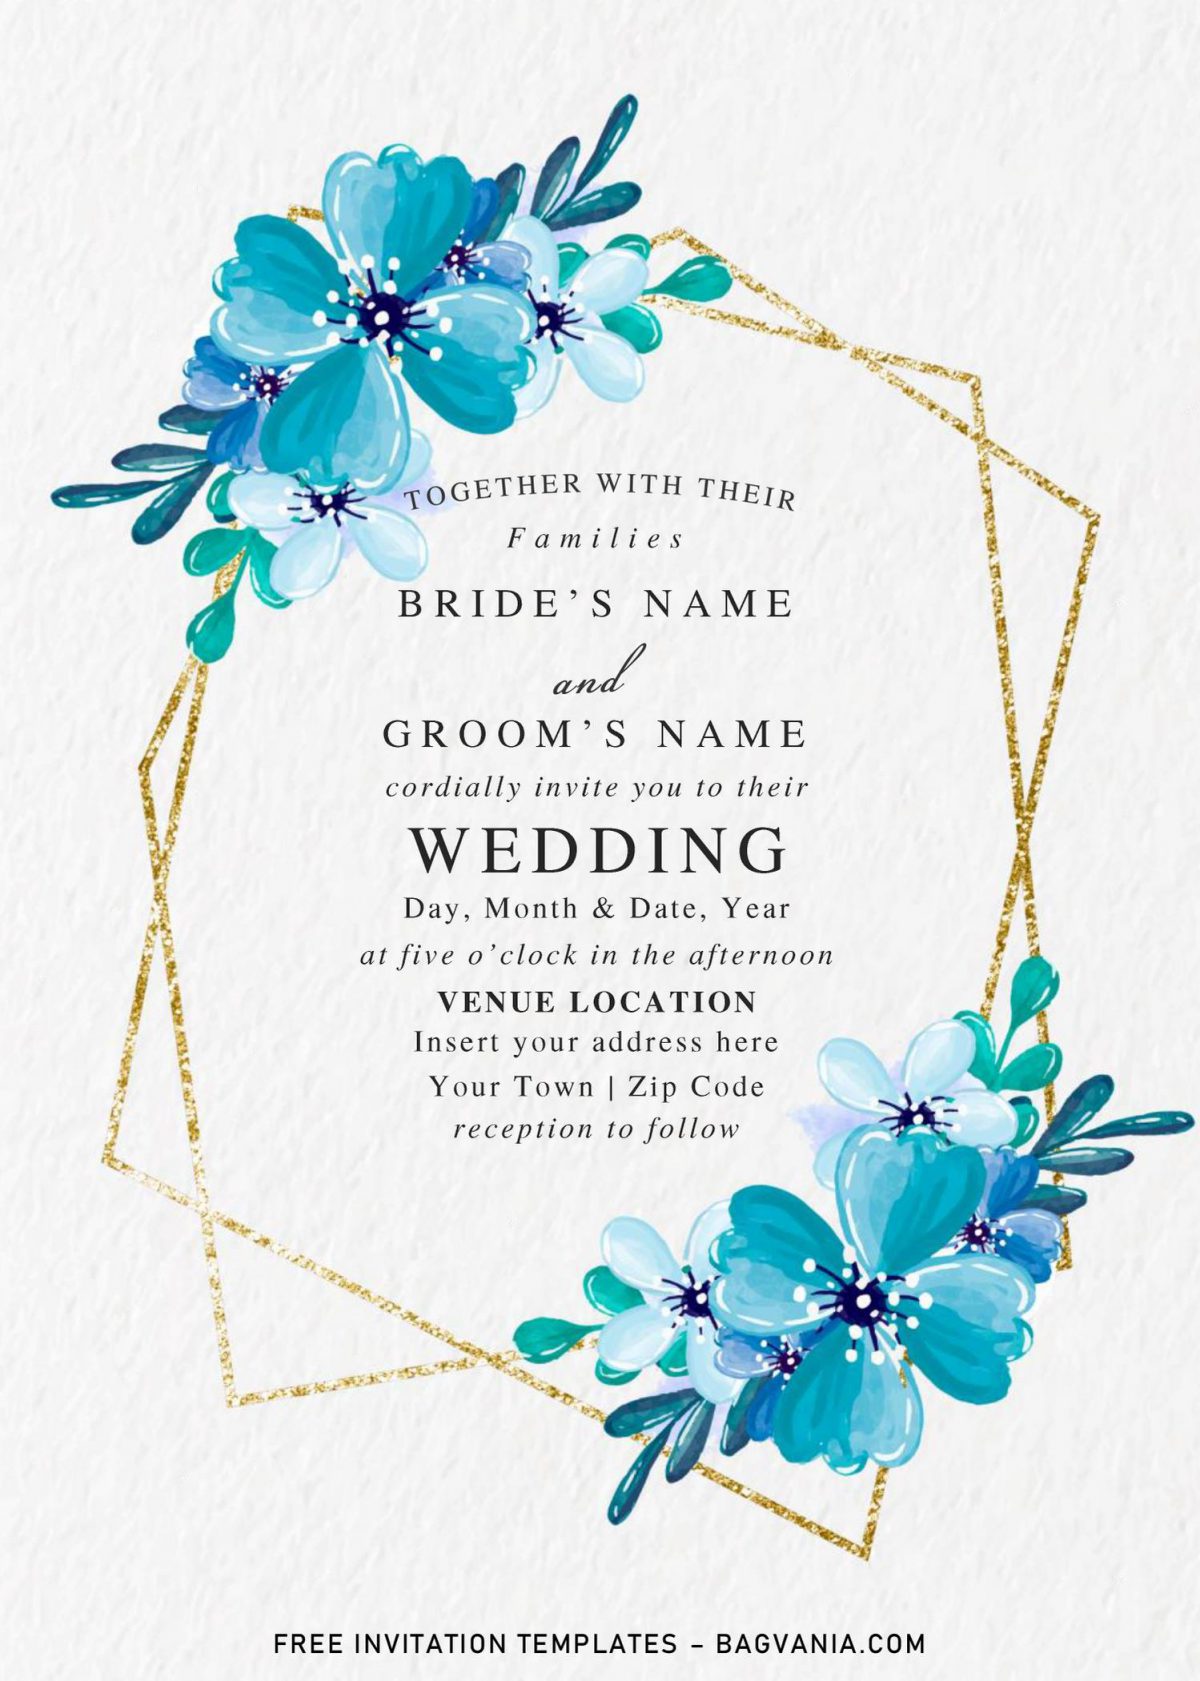 Free Blue Floral And Gold Geometric Wedding Invitation Templates For Word and has gorgeous blue roses and gold splatter